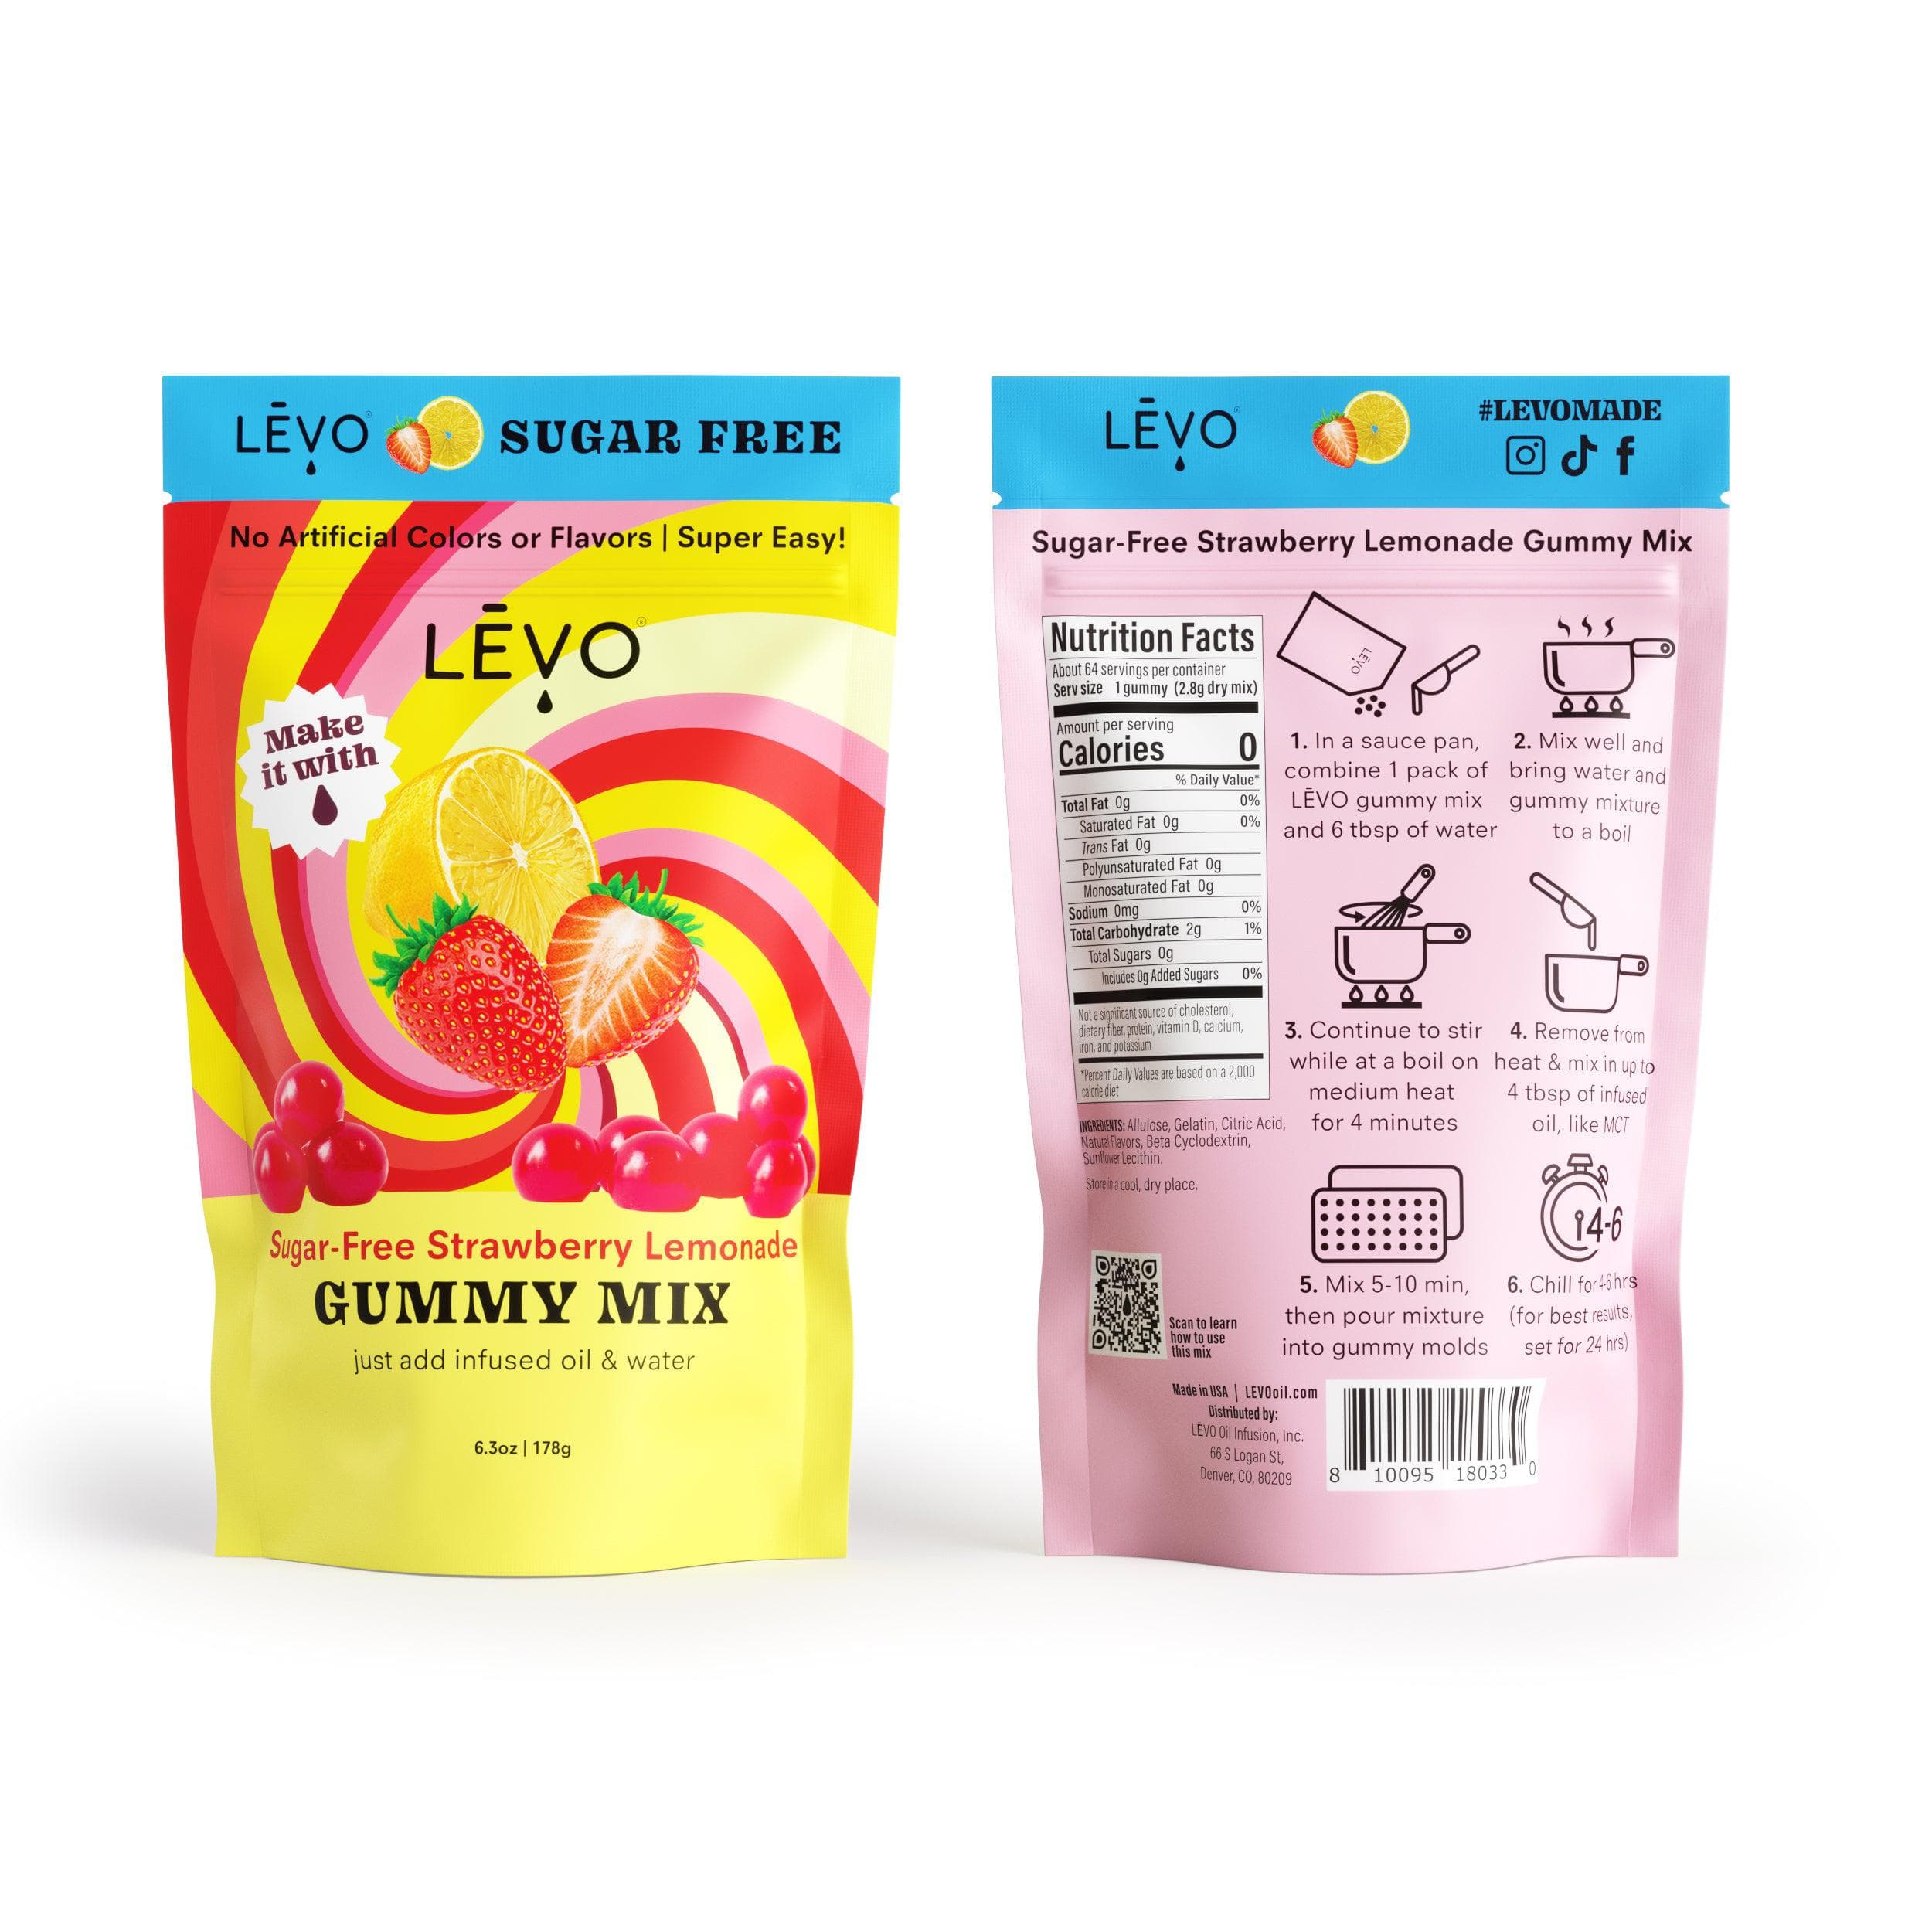 LĒVO Sugar Free Strawberry Lemonade Mix. Bundle and Save! Make your own edibles with LEVO gummy mix.